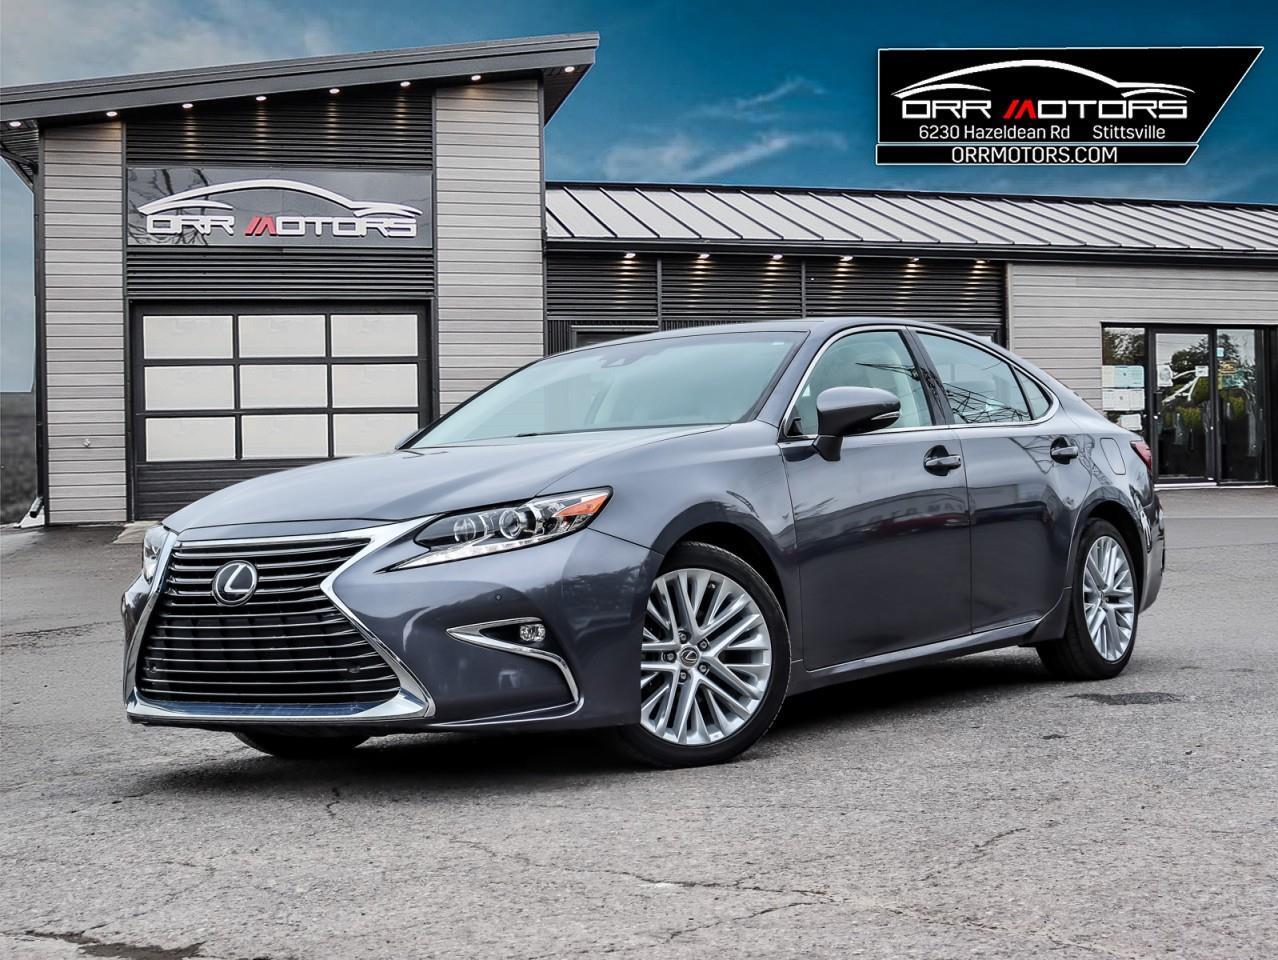 2016 Lexus ES 350 **COMING SOON - CALL NOW TO RESERVE**SUPER LOW KMS